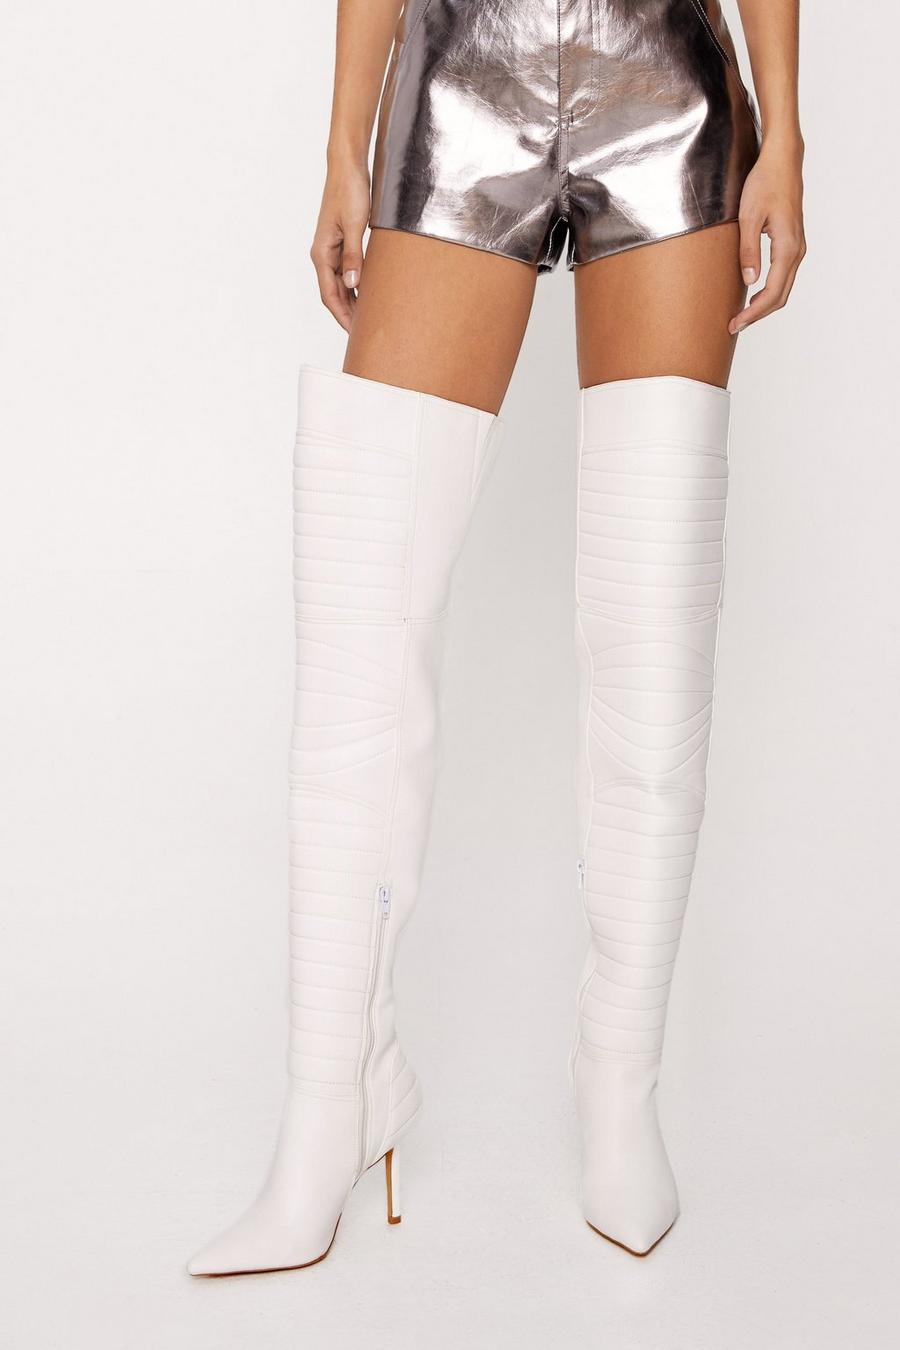 White Faux Leather Padded Motocross Thigh High Boots image number 1